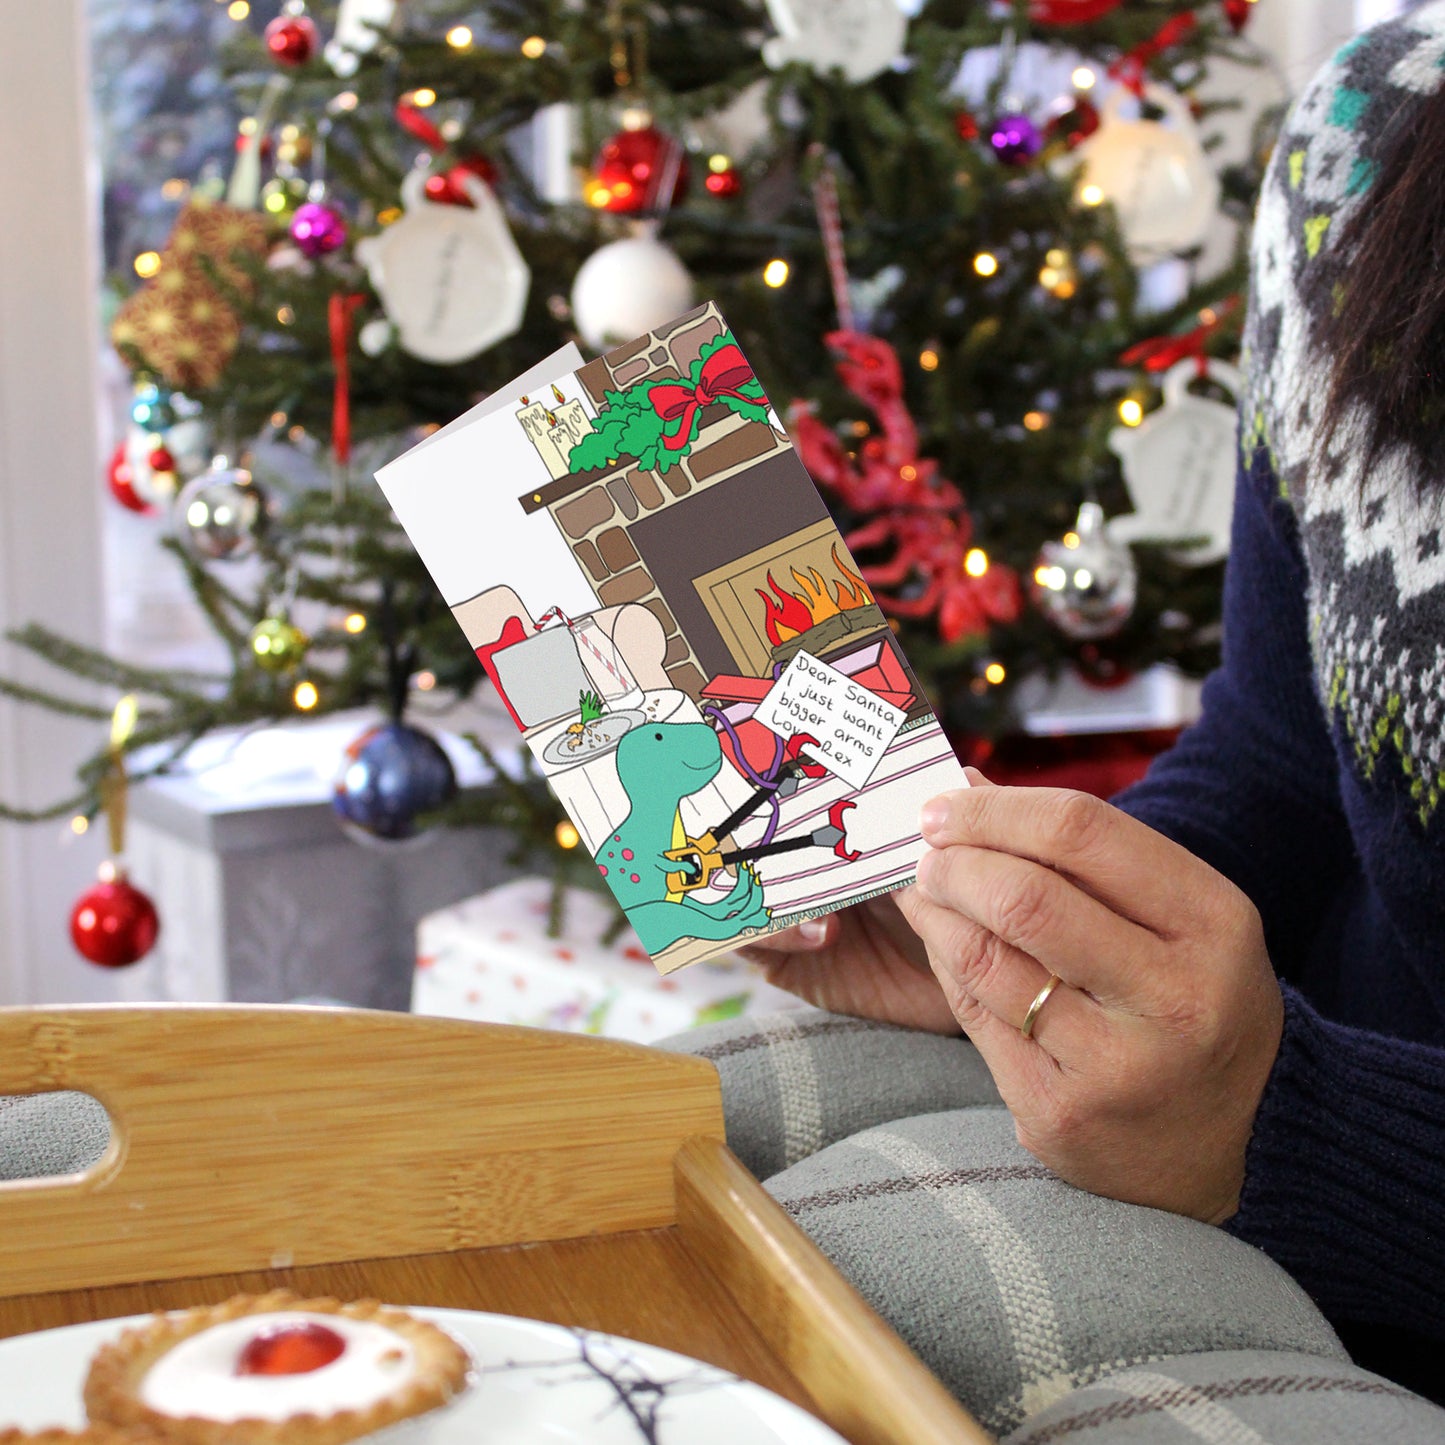 Christmas morning dinosaur card being held in front of a Christmas tree